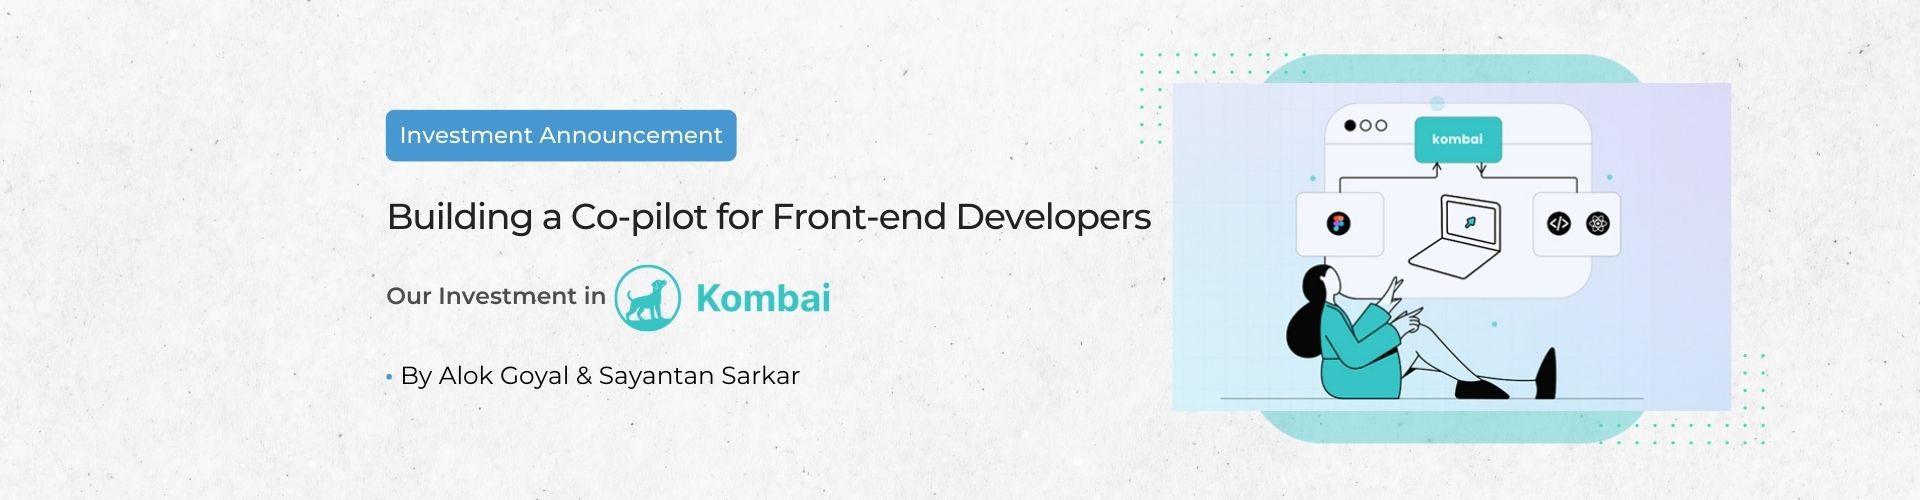 Building a Co-pilot for Front-end Developers – Our Investment in Kombai